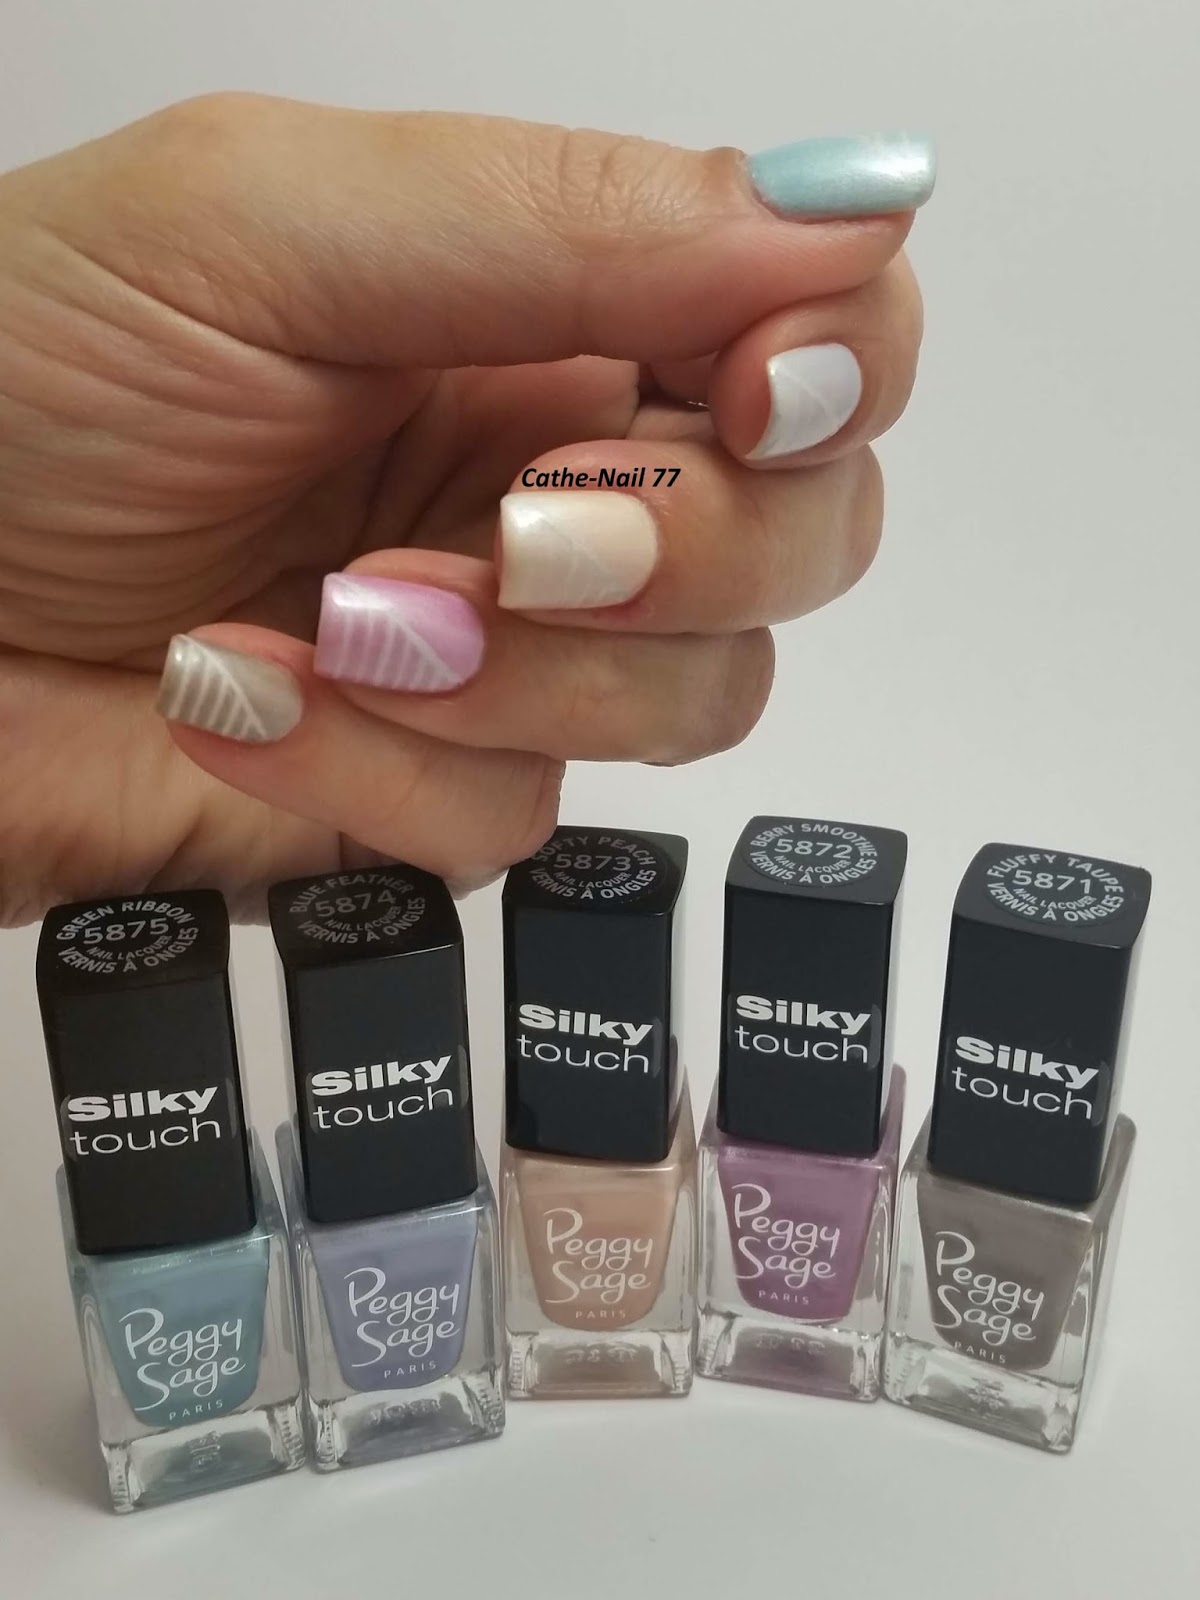 http://cathenail.blogspot.fr/2014/11/peggy-sage-silky-touch-collection-pastel.html